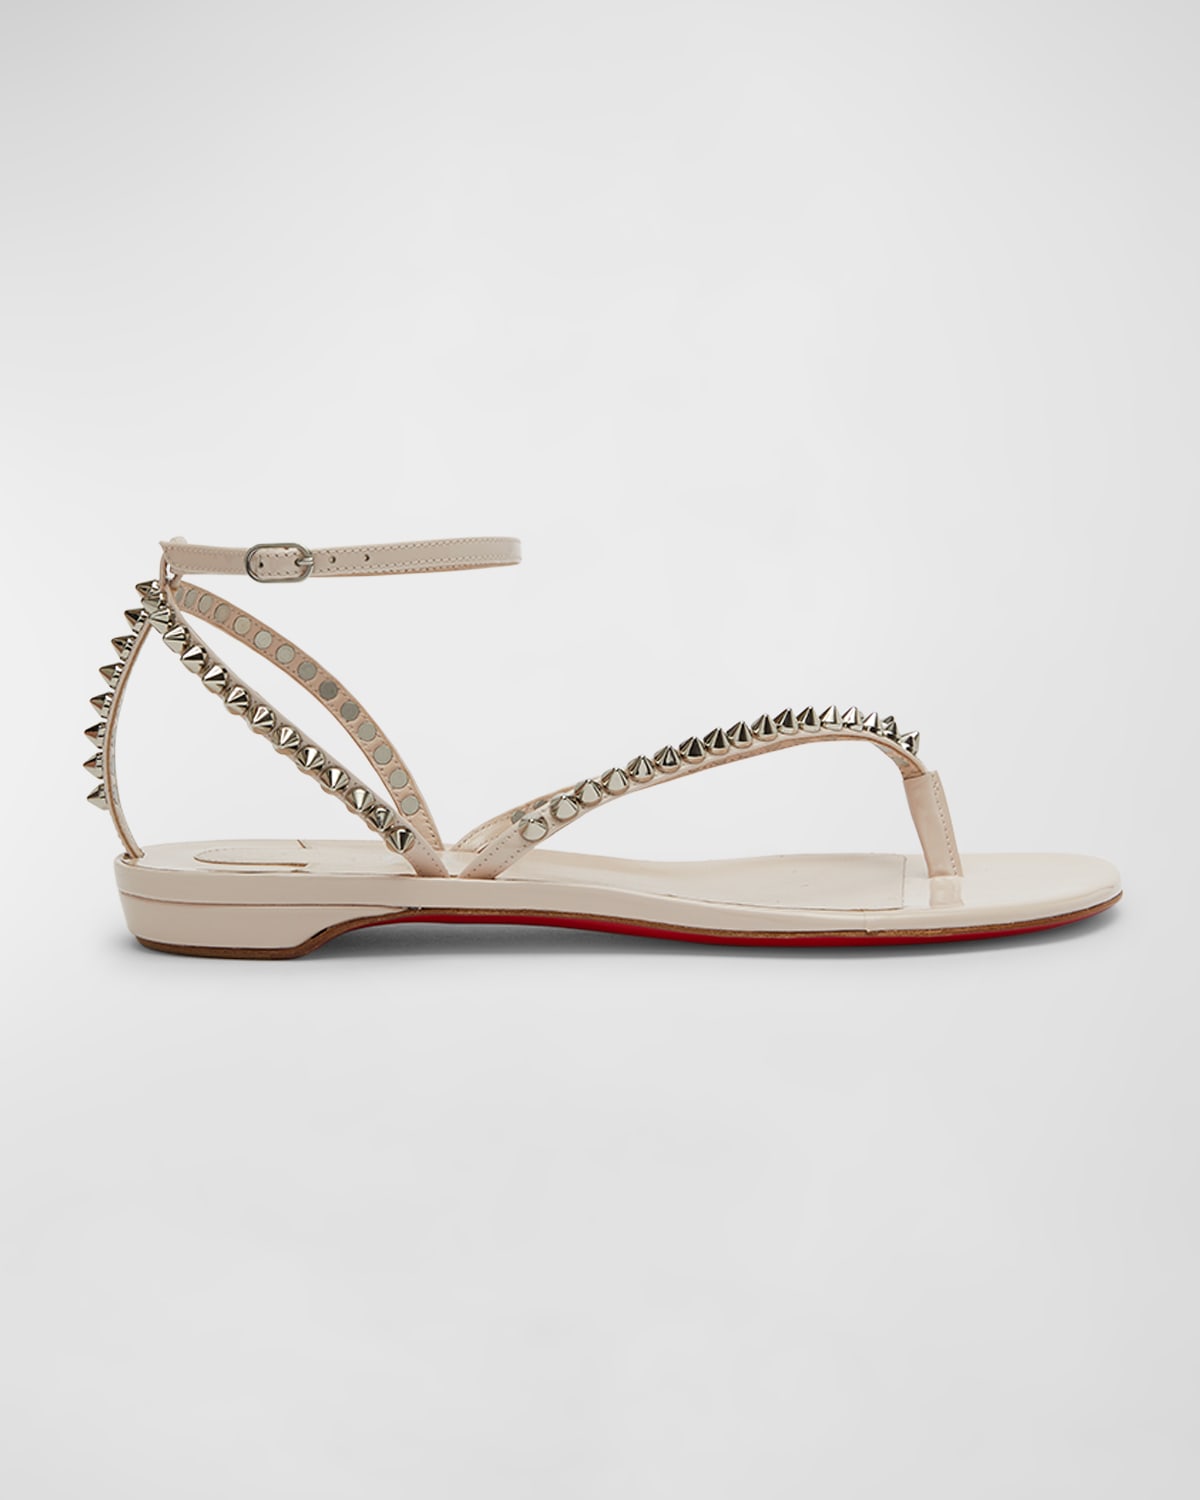 CHRISTIAN LOUBOUTIN SO ME TONGUETTA SPIKE RED SOLE THONG SANDALS